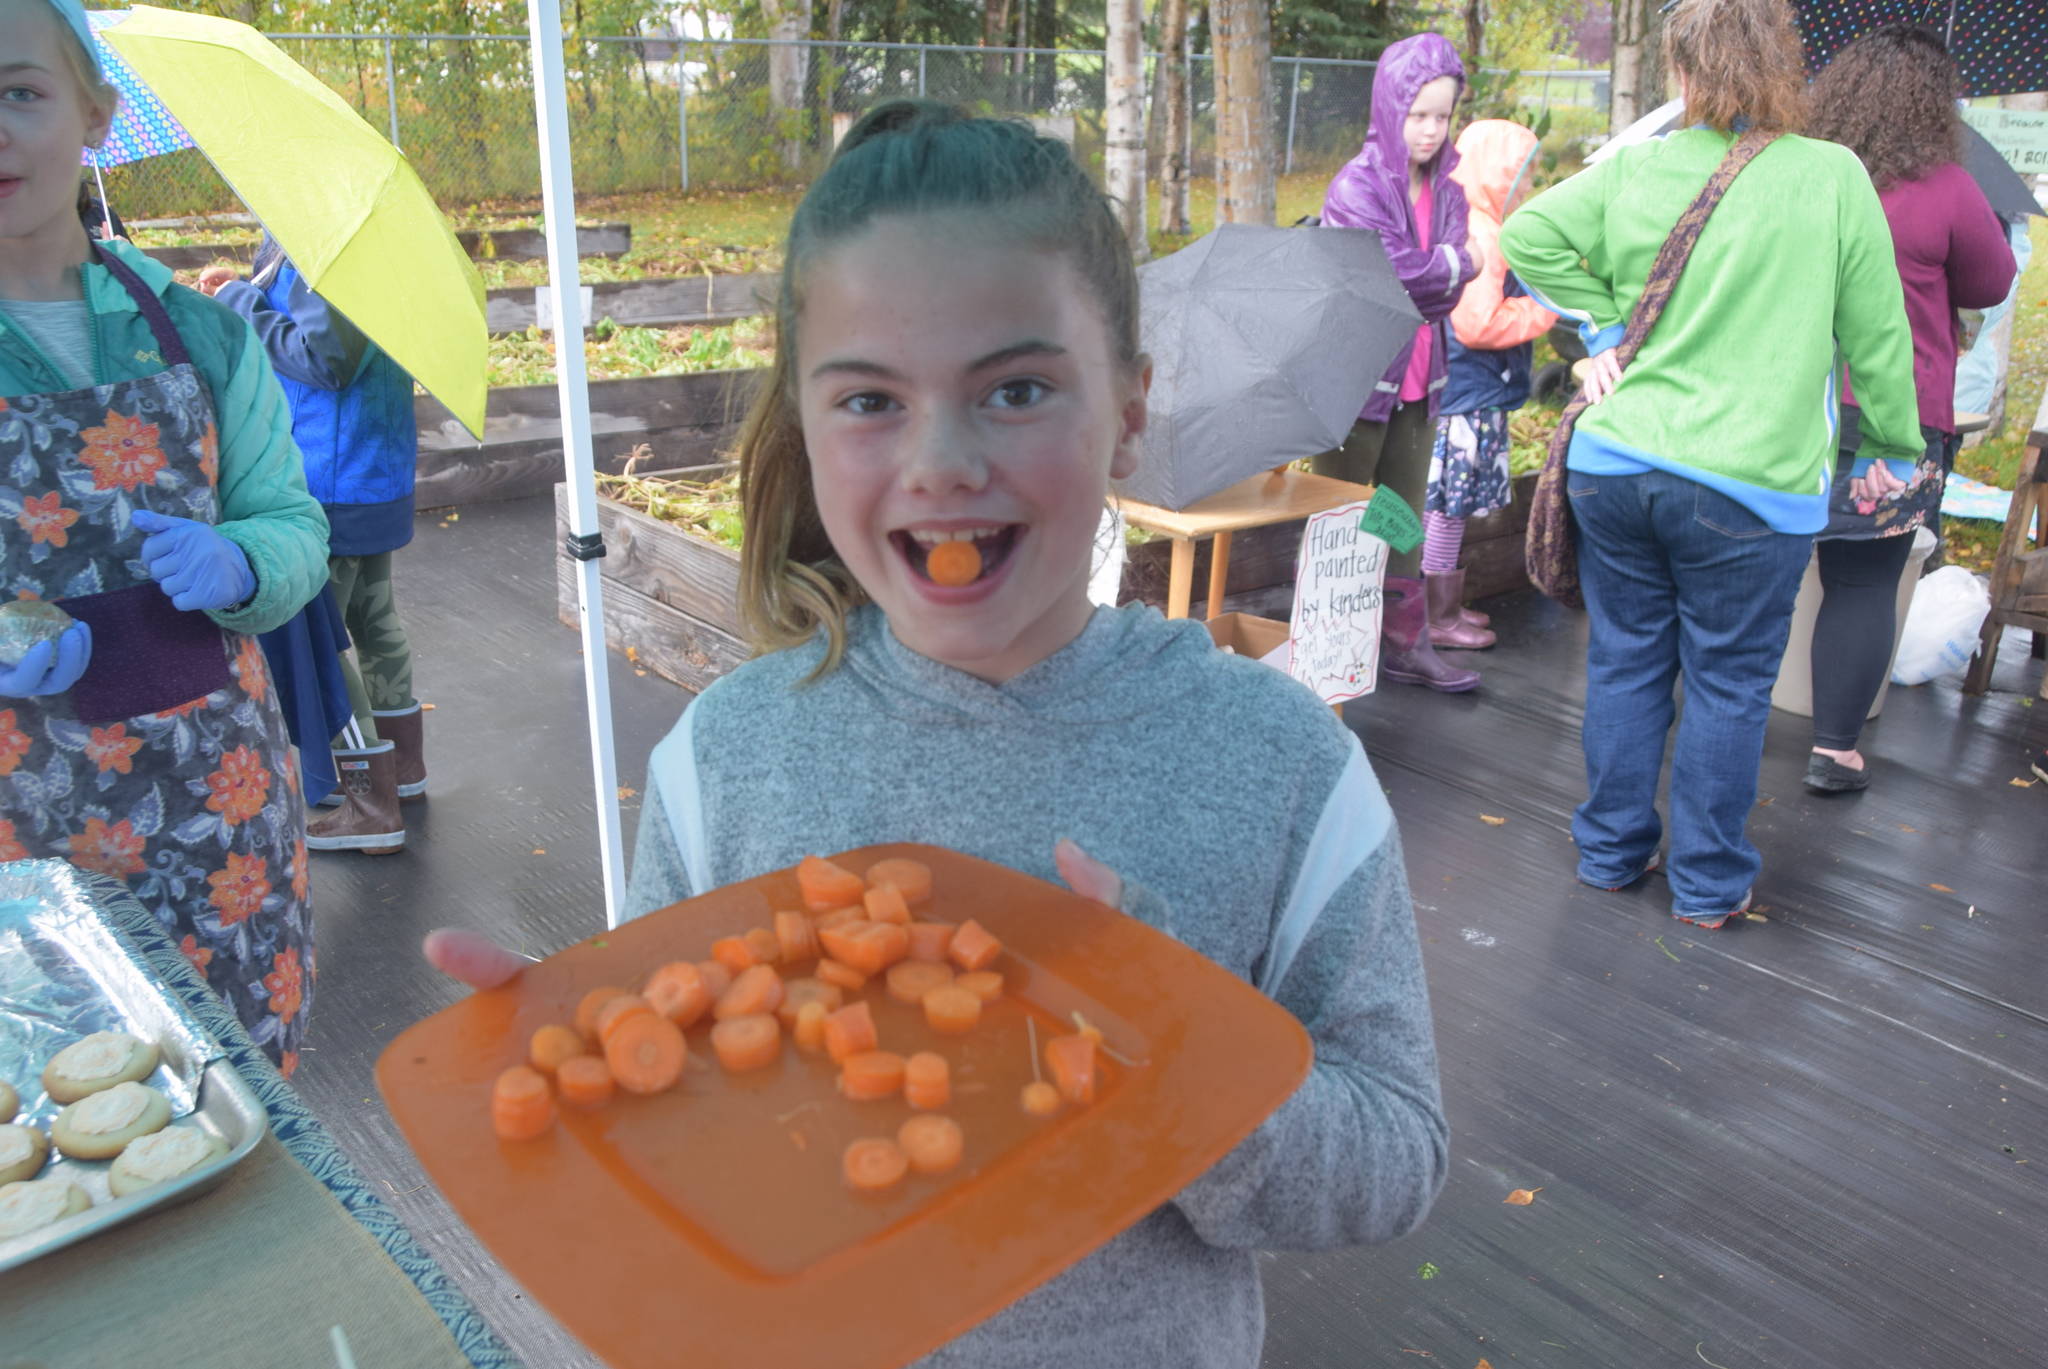 Fourth grader Shea Linton hands out free carrot samples at the Montessori Farmer’s Market at the Soldotna Montessori School on Sept. 13, 2019. (Photo by Brian Mazurek/Peninsula Clarion)